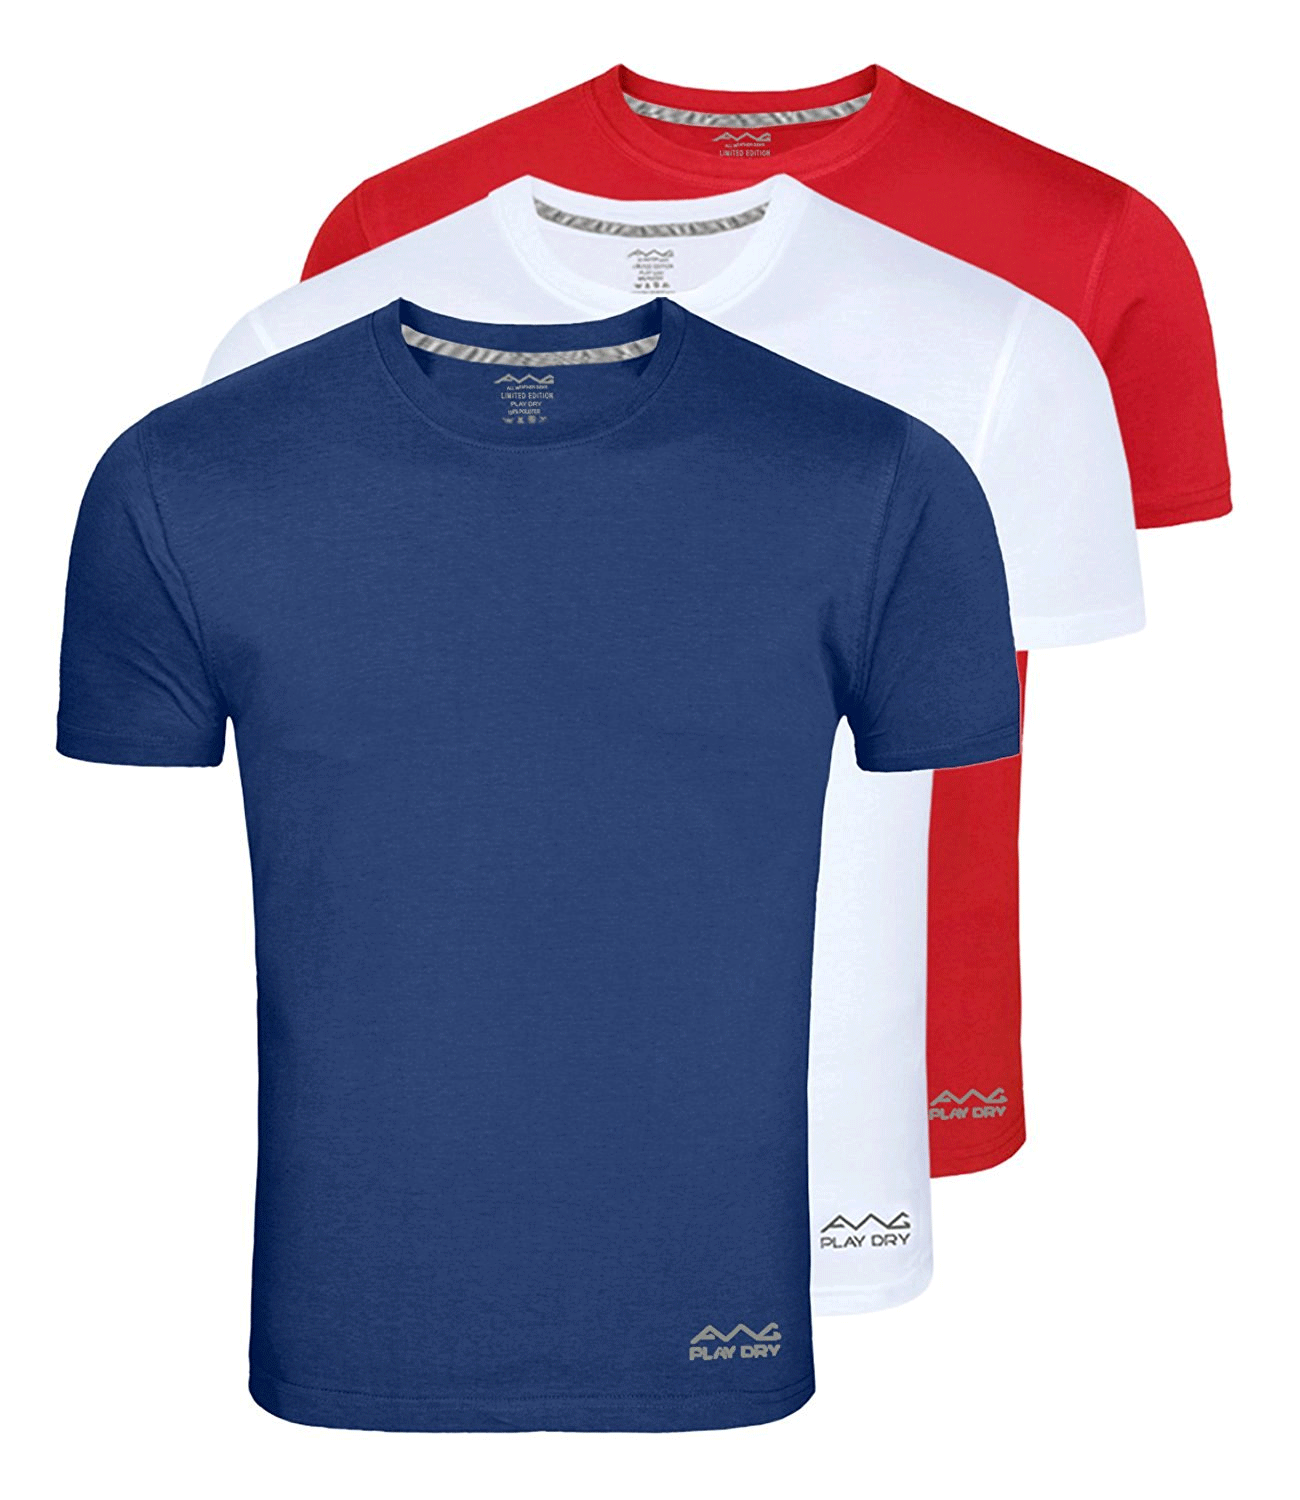 AWG 100ANB (150 GSM) Drifit Performance Sports Round Neck T-shirt Red